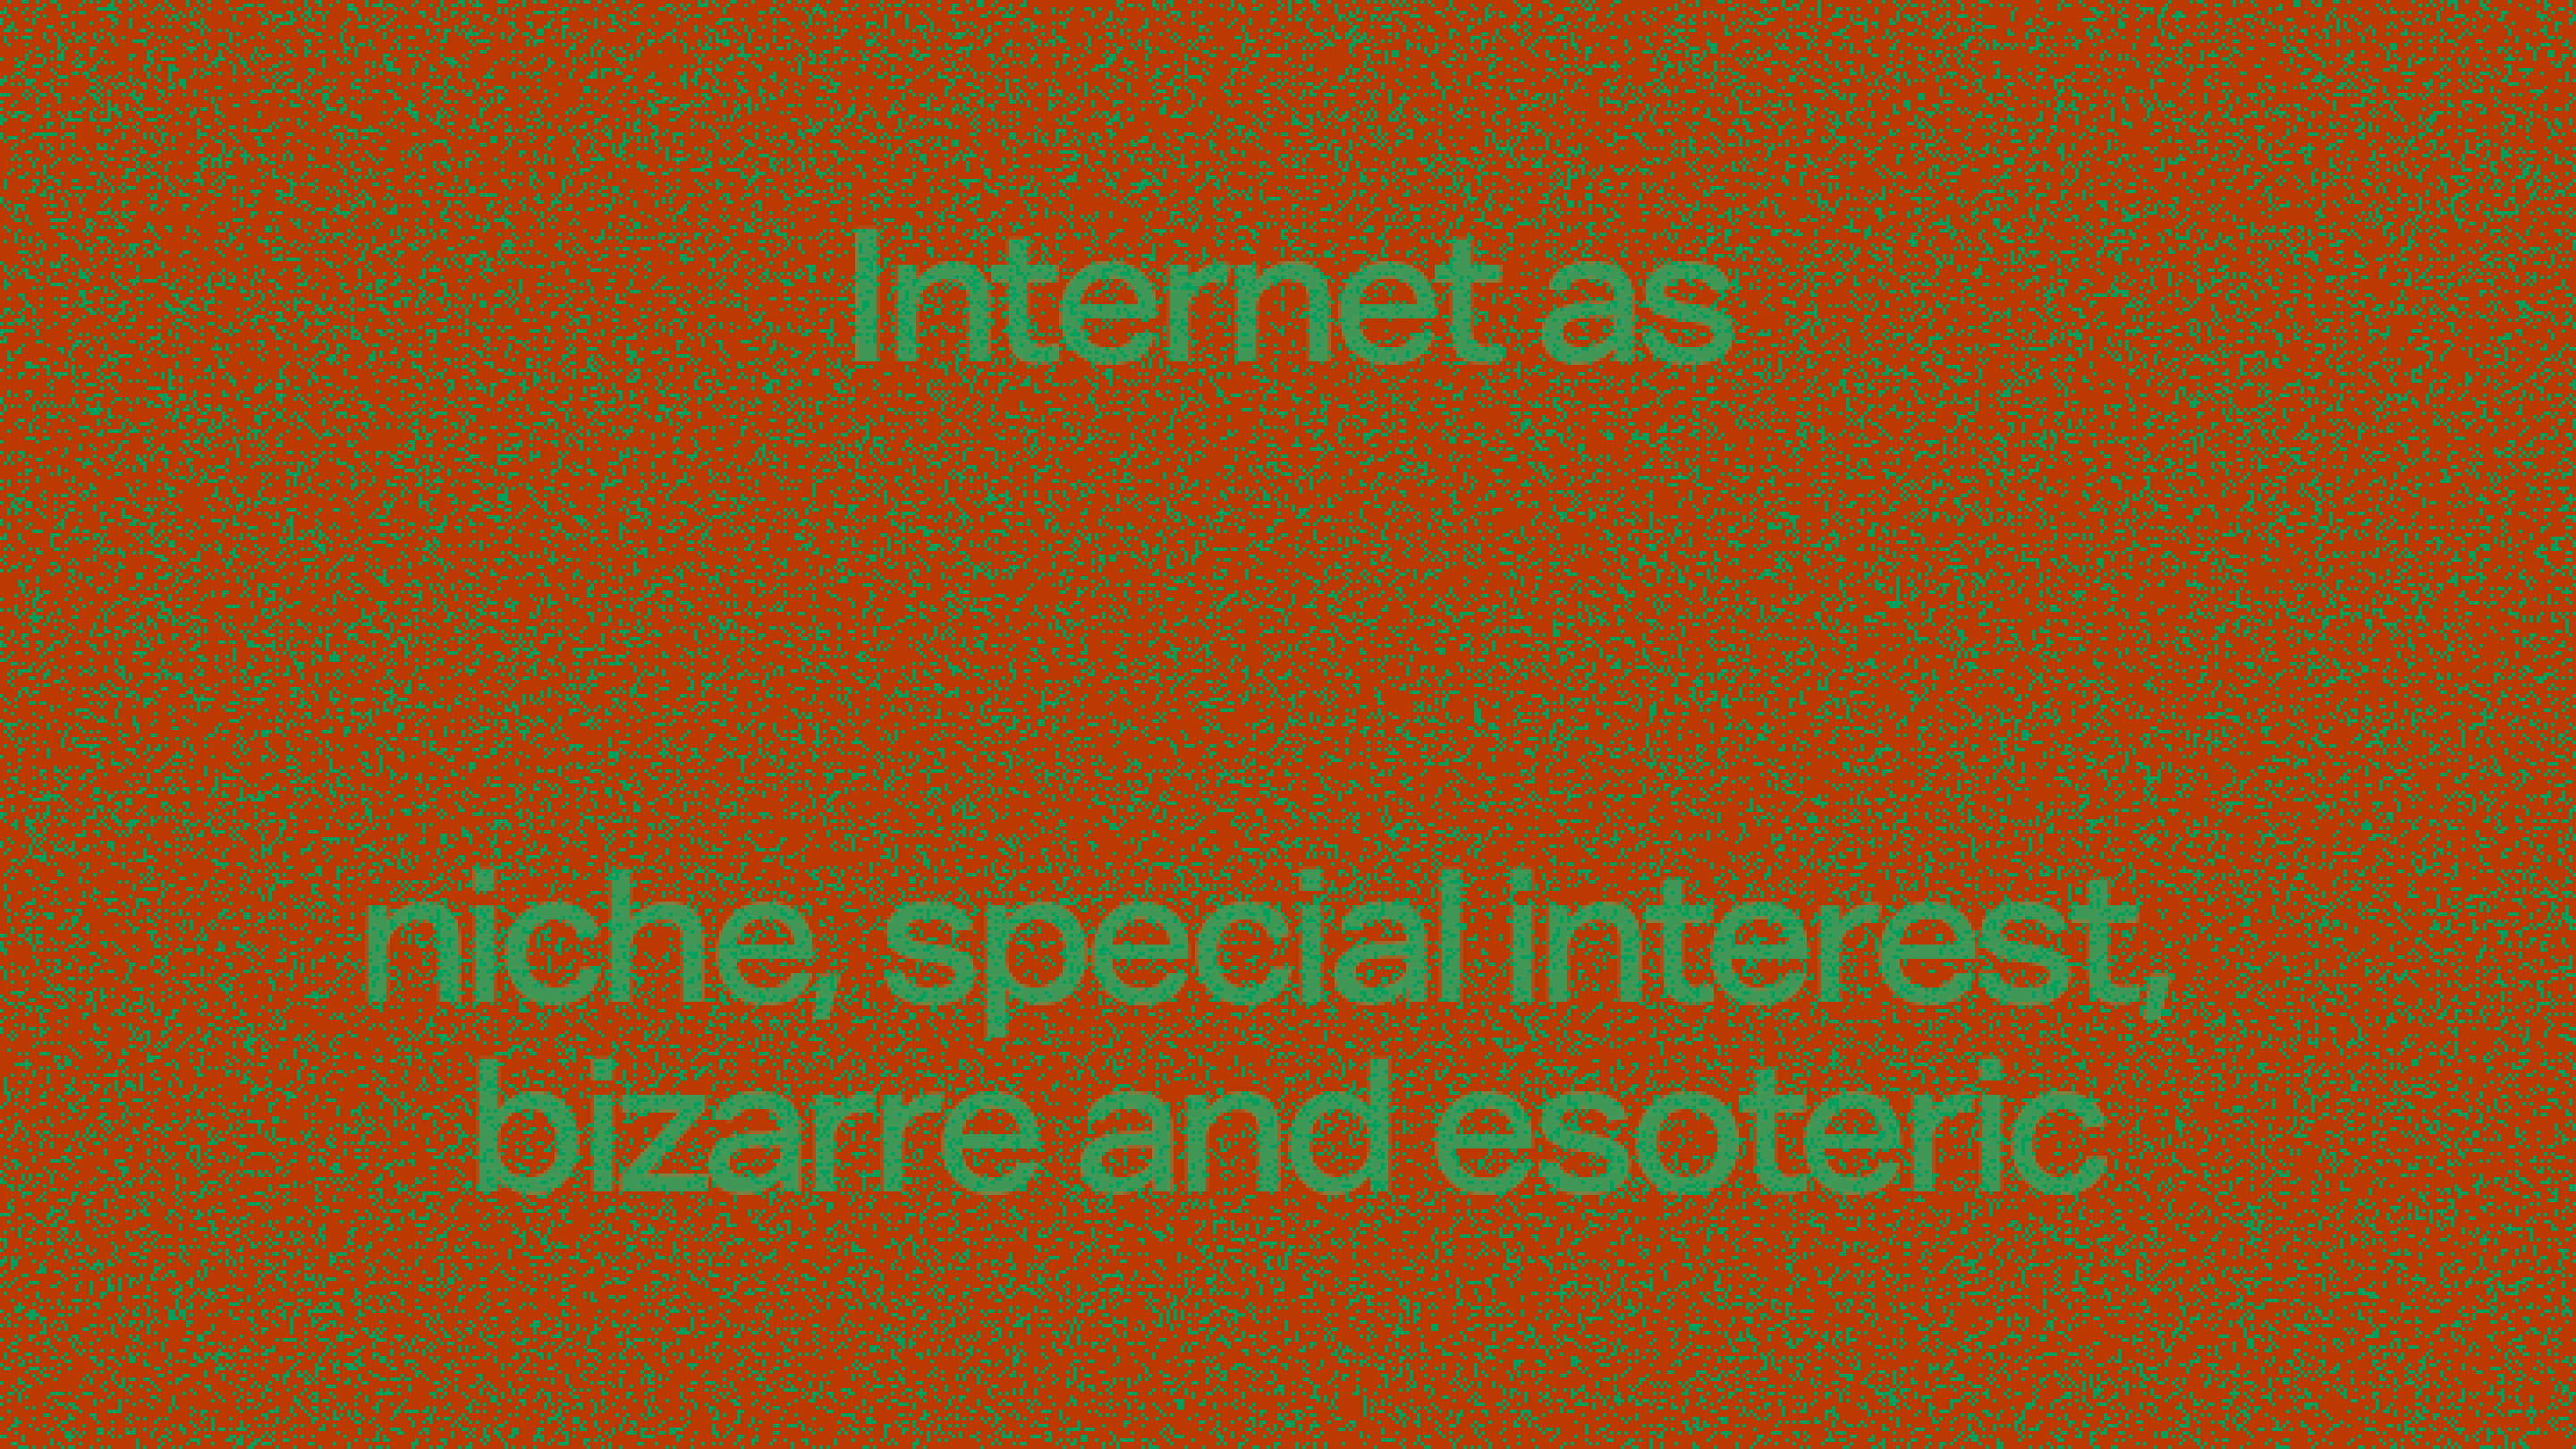 internet as niche, special interest, bizarre, and esoteric